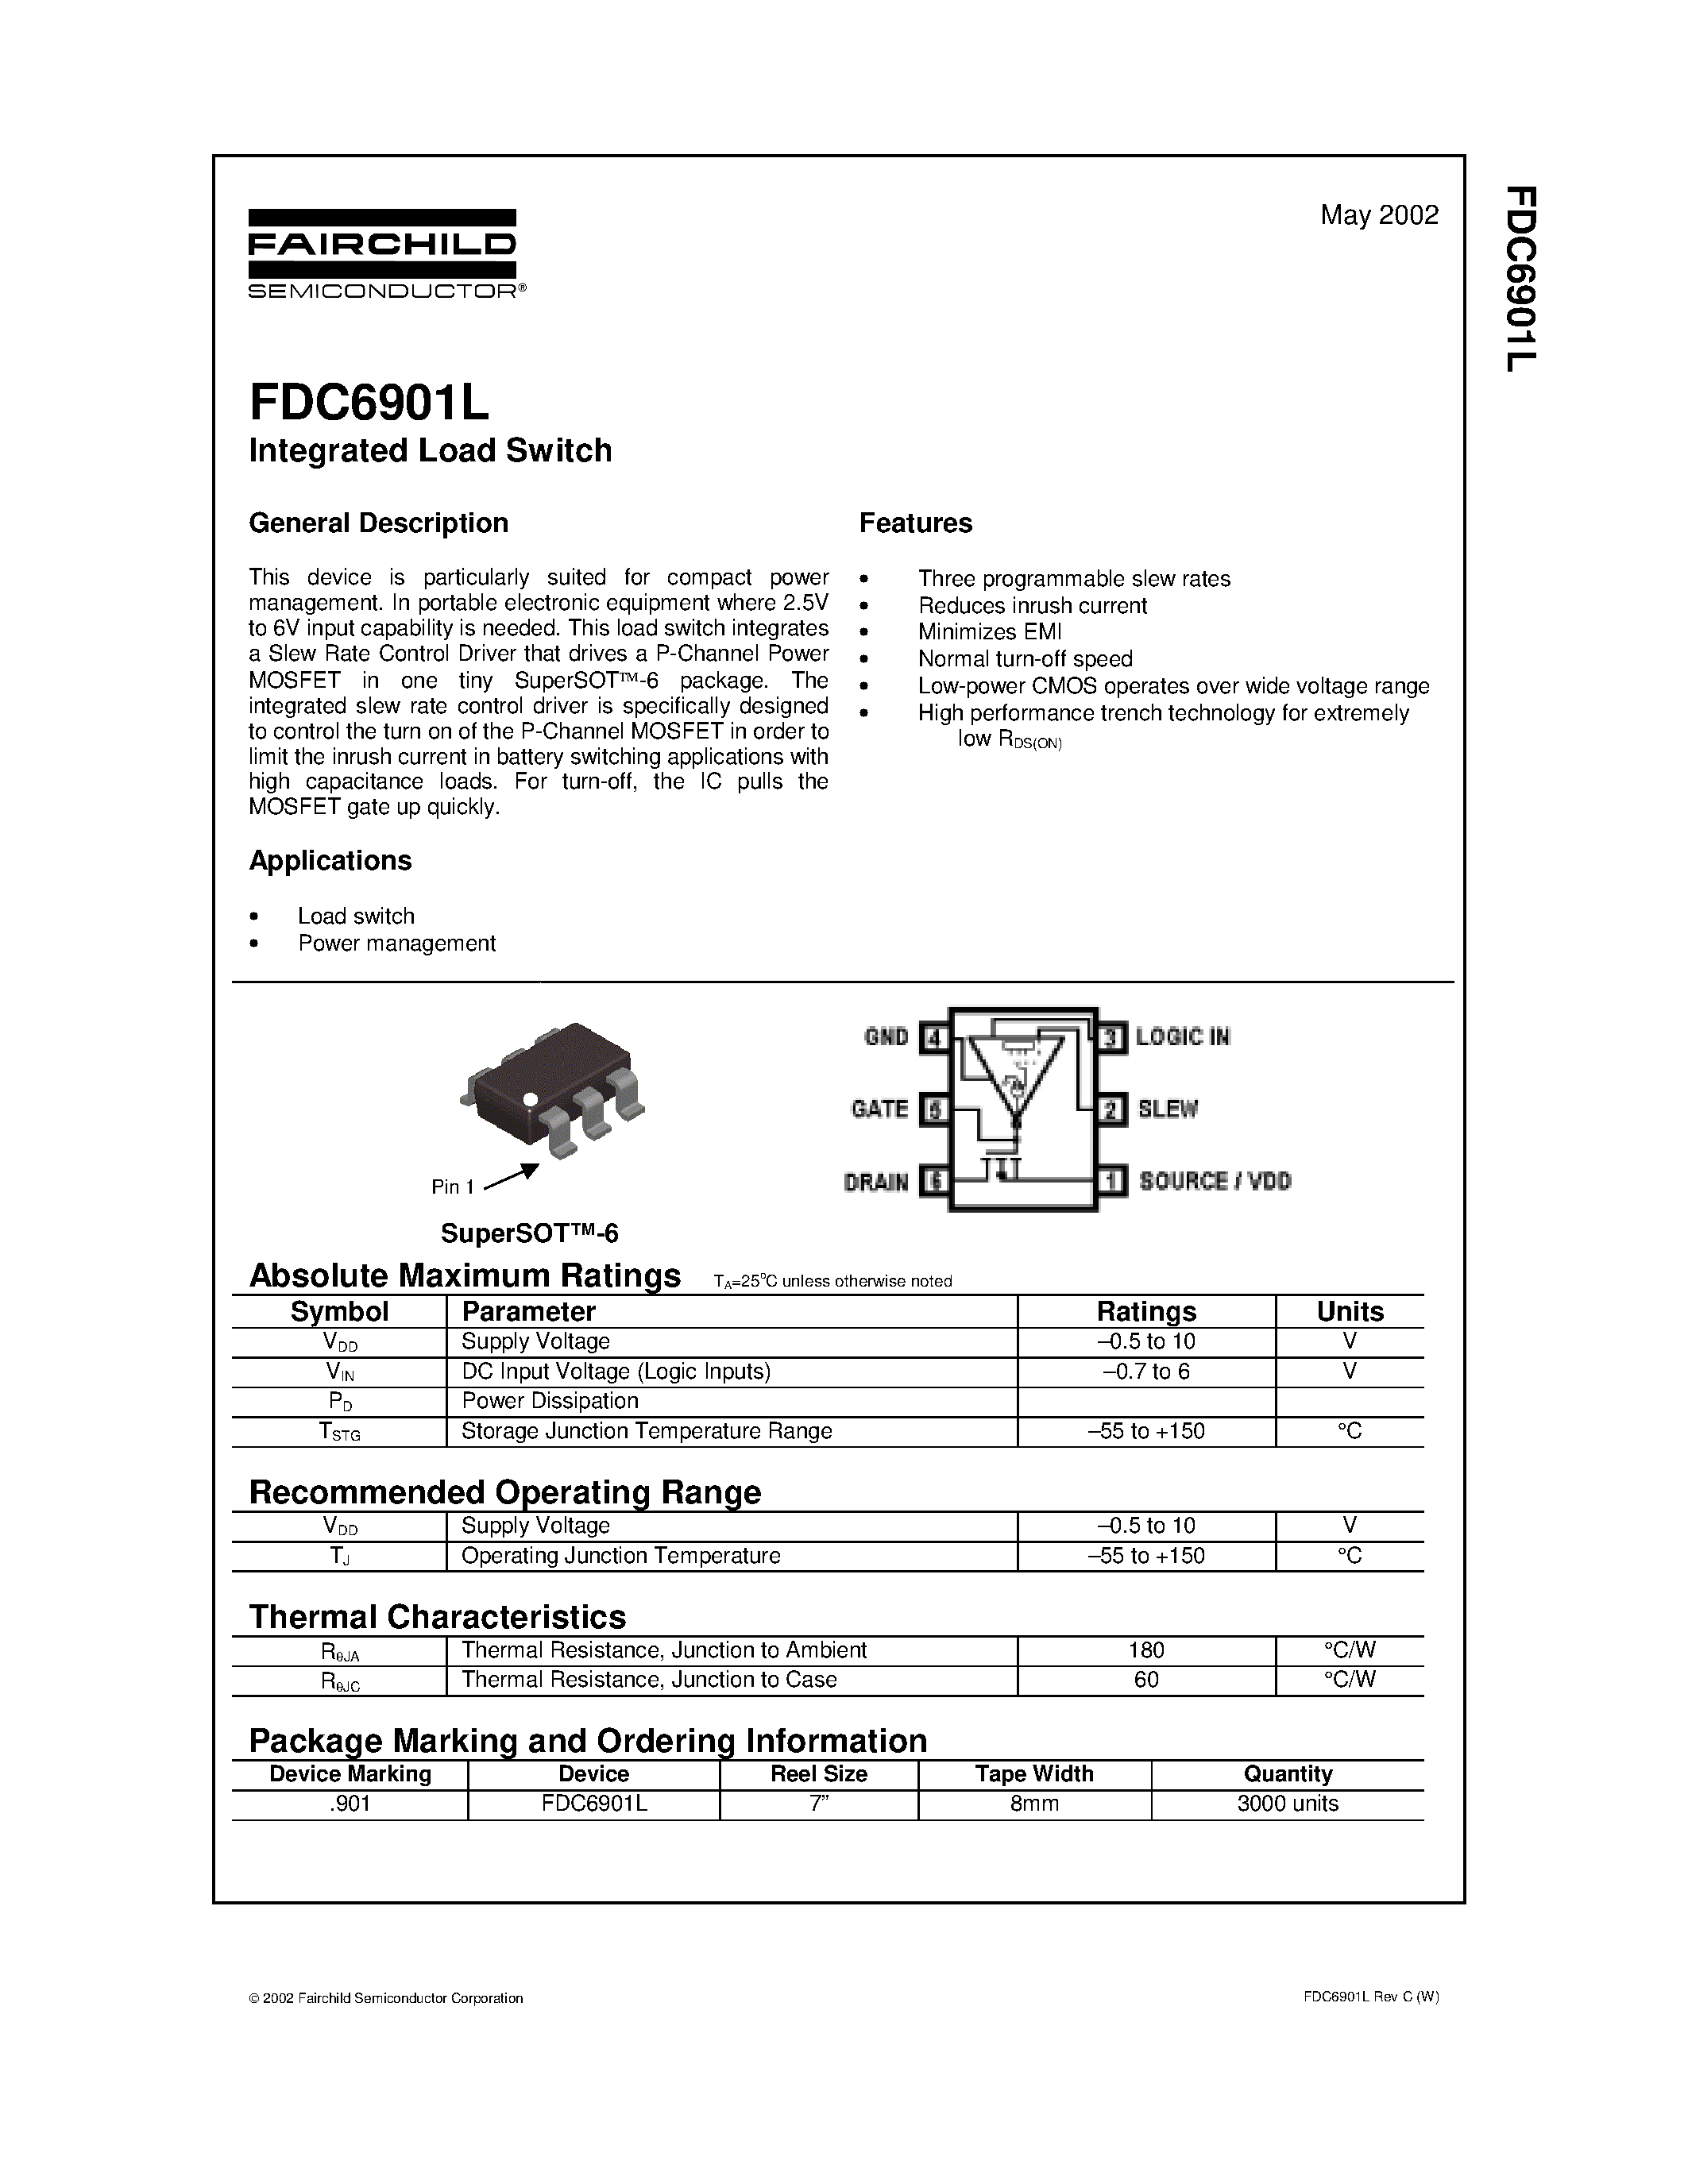 Datasheet FDC6901L - Integrated Load Switch page 1